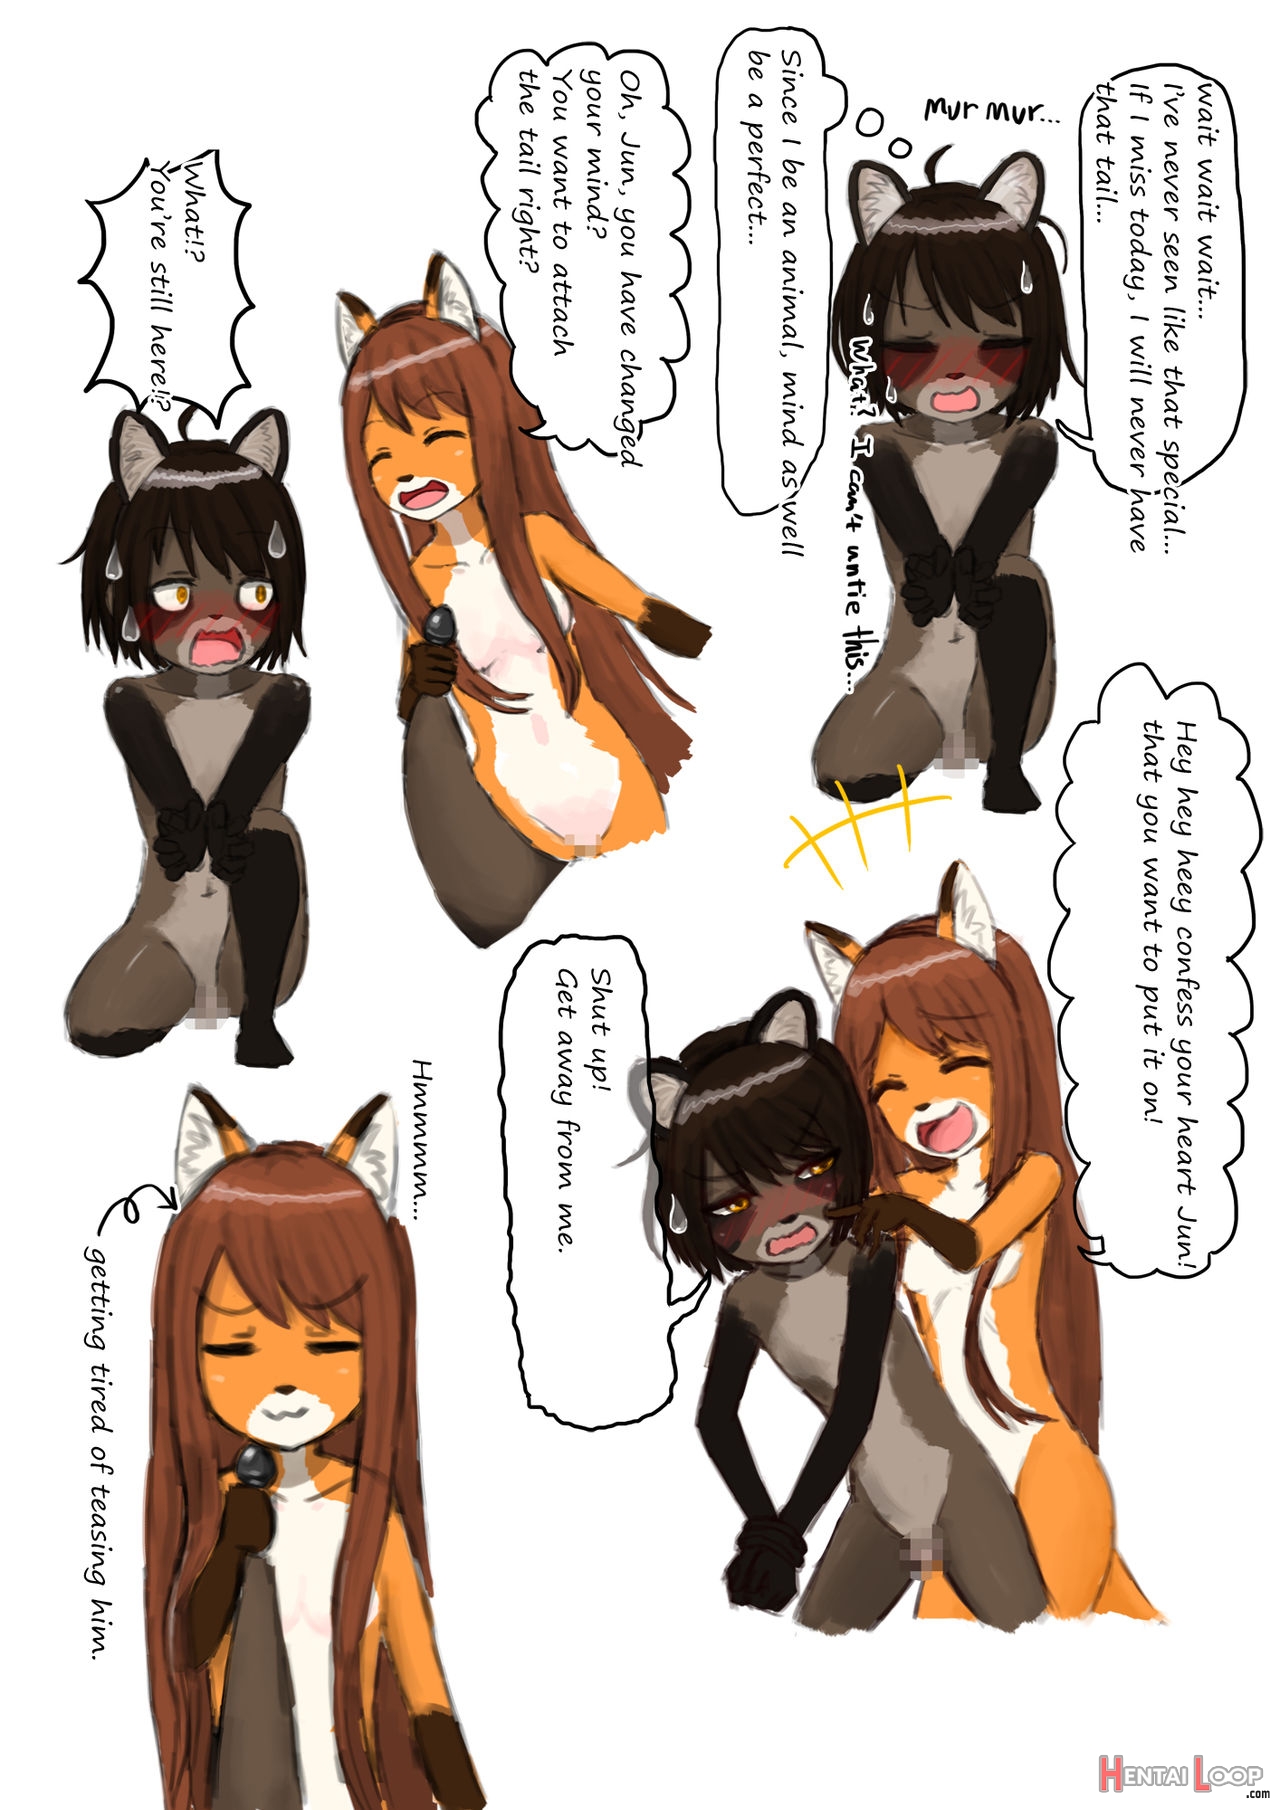 Moved To A Country Side, Became A Salacious Raccoon. page 29